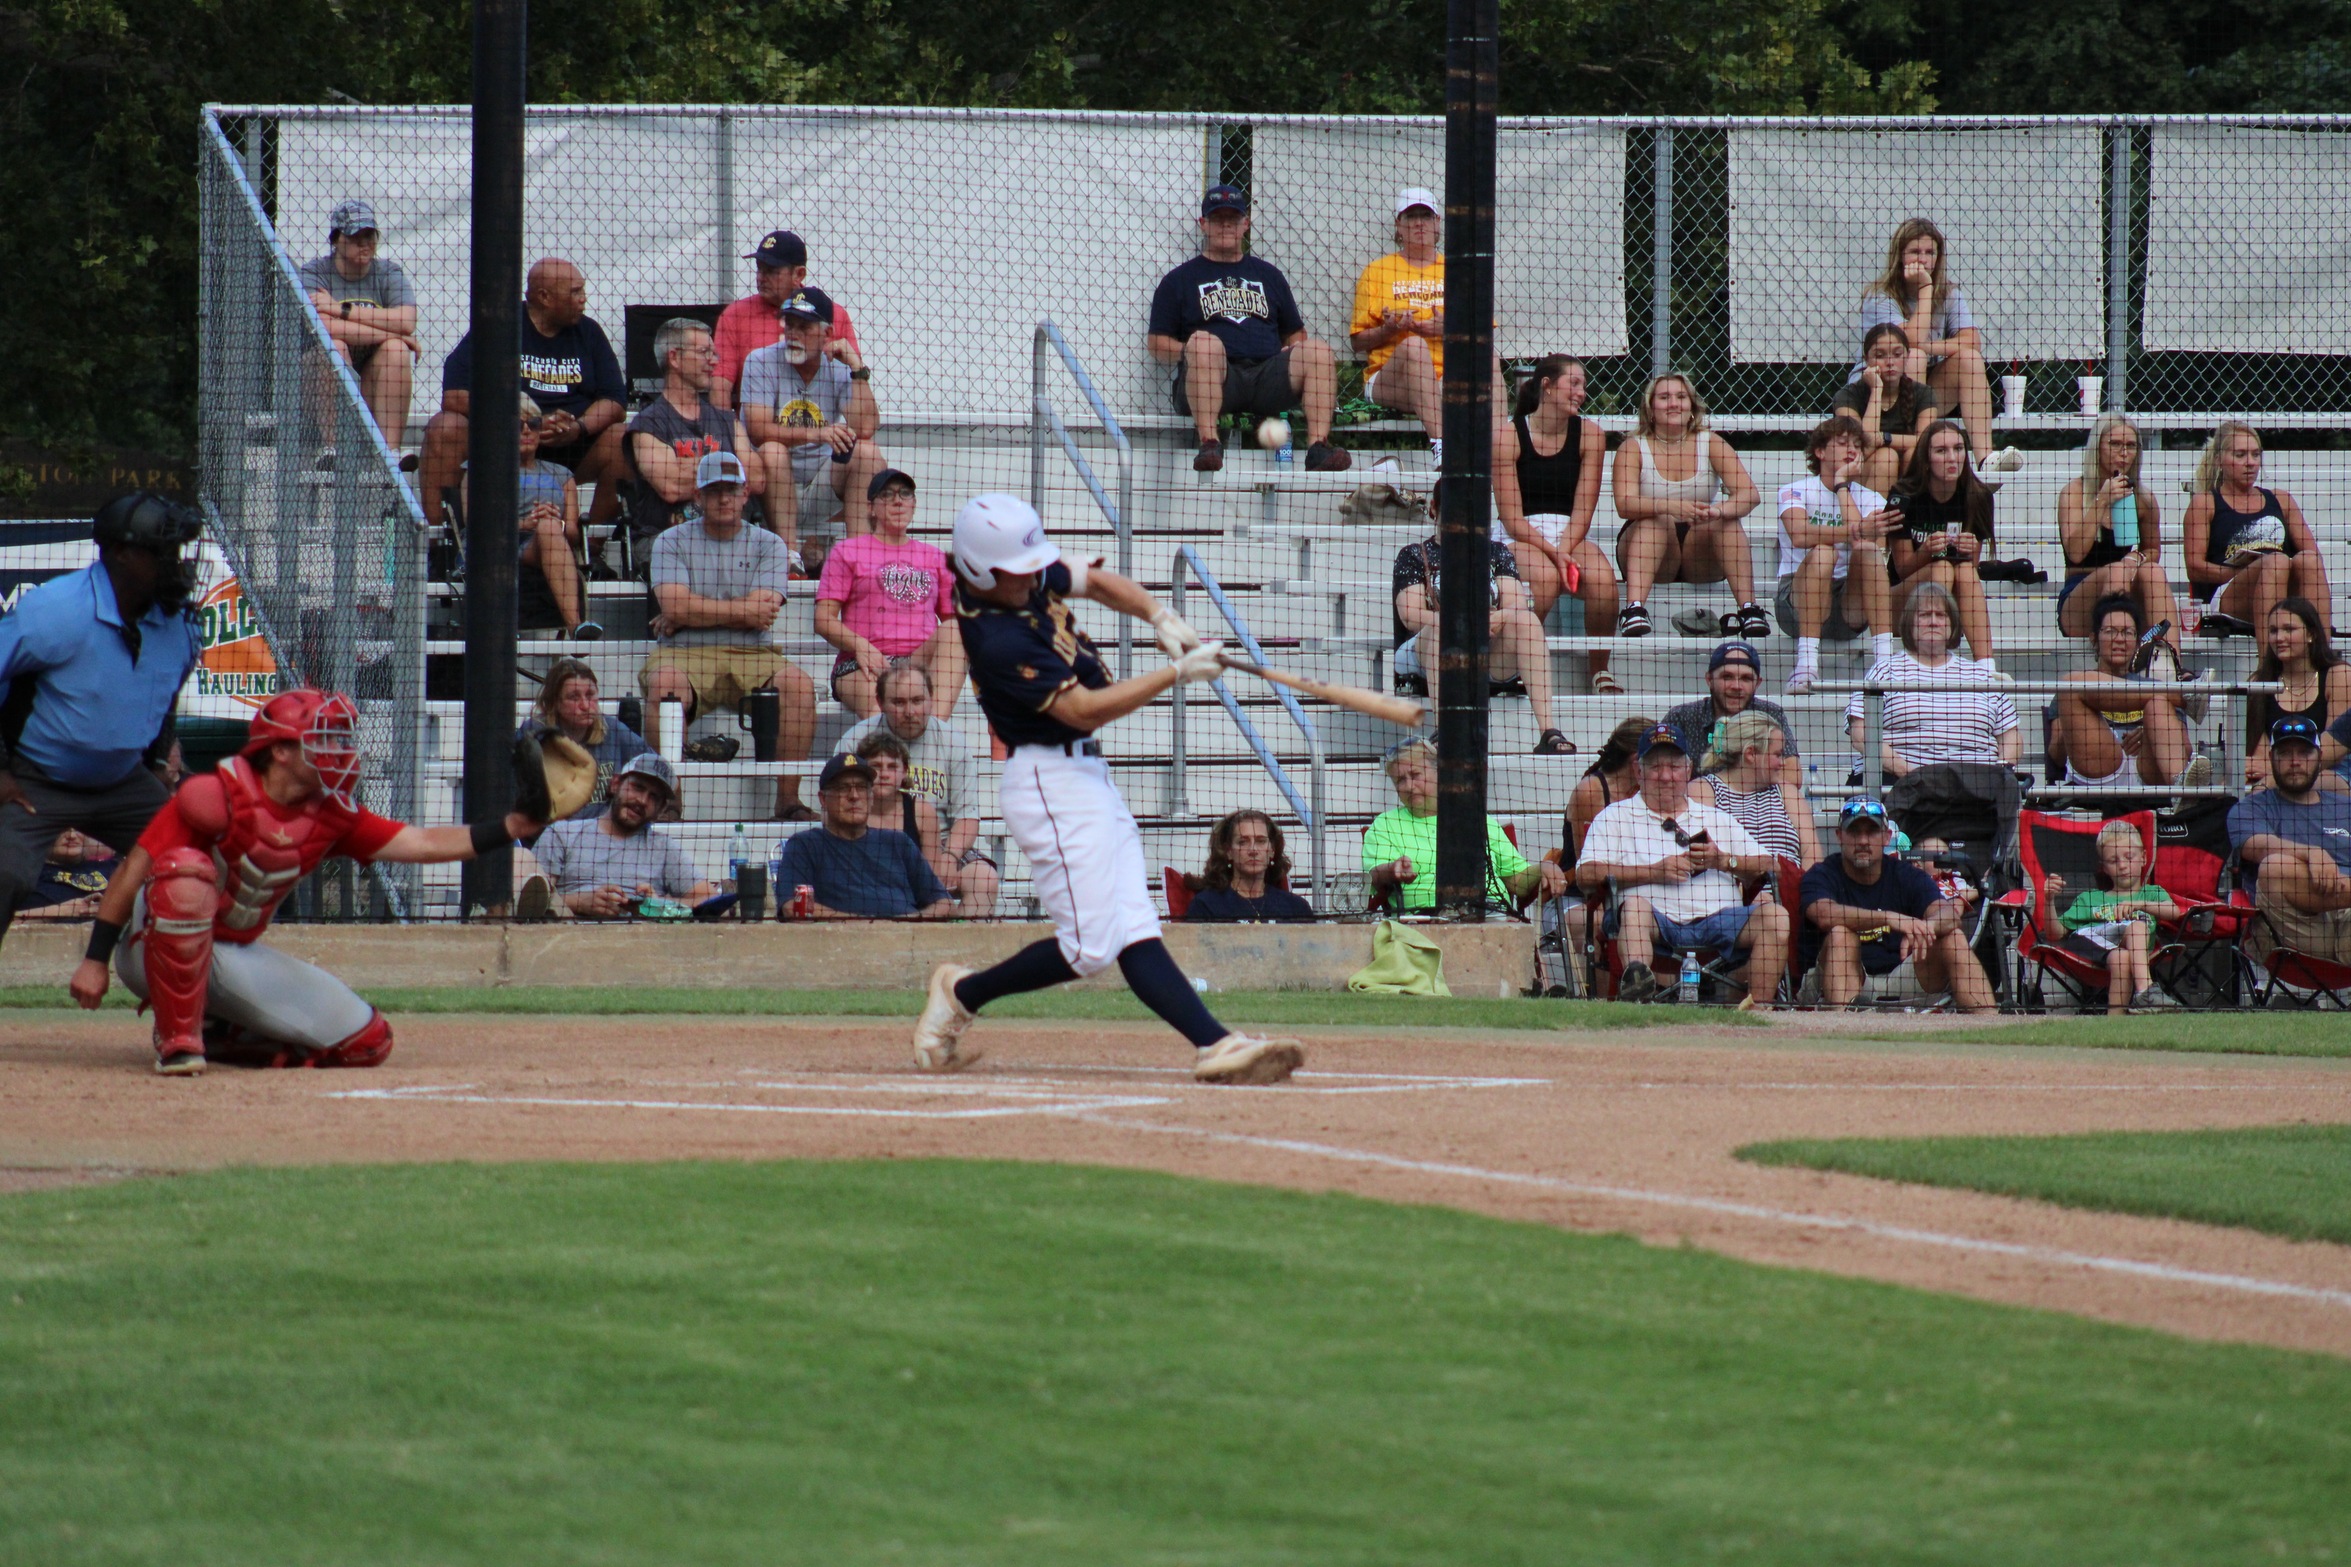 Renegades collected 17 hits in a 8-7 walk-off victory in 10 innings. (Photo by Chris Kamler)